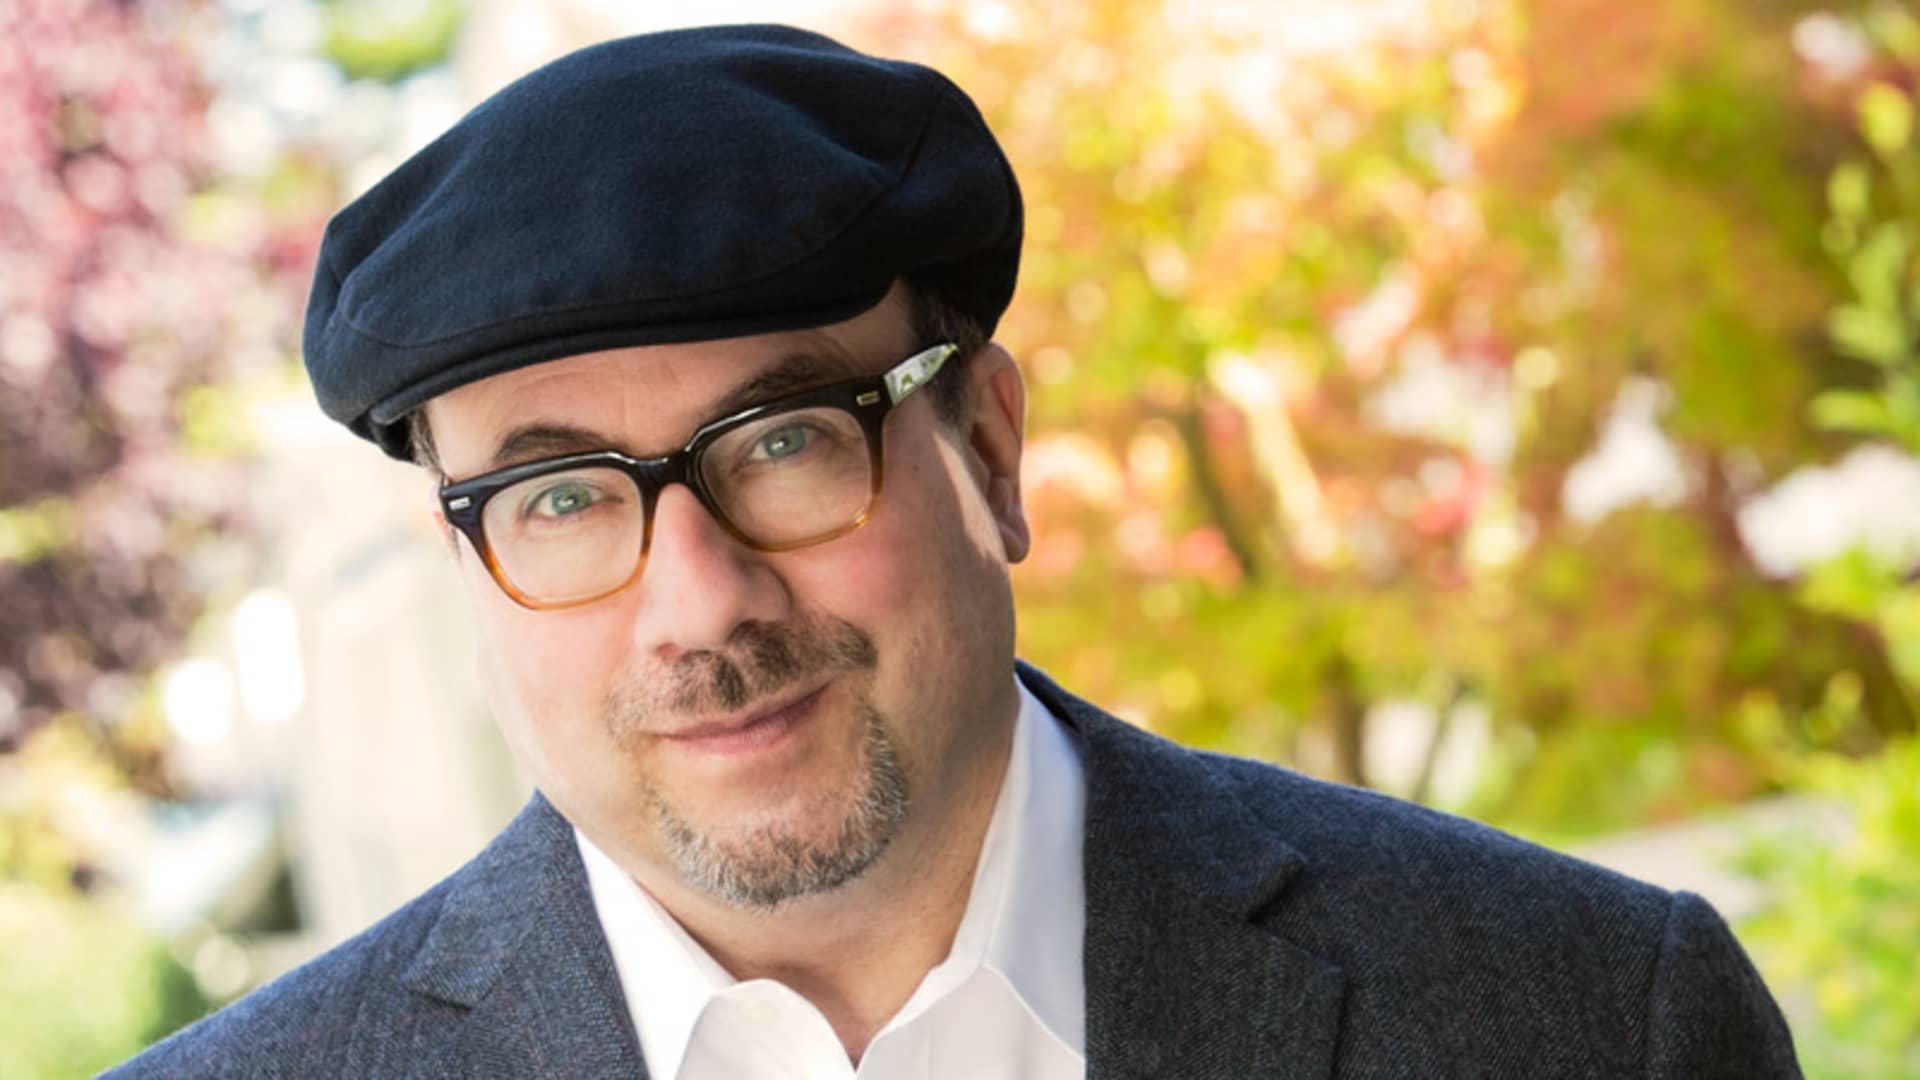 Craigslist founder Craig Newmark is pouring millions of dollars into combating AI's dark side